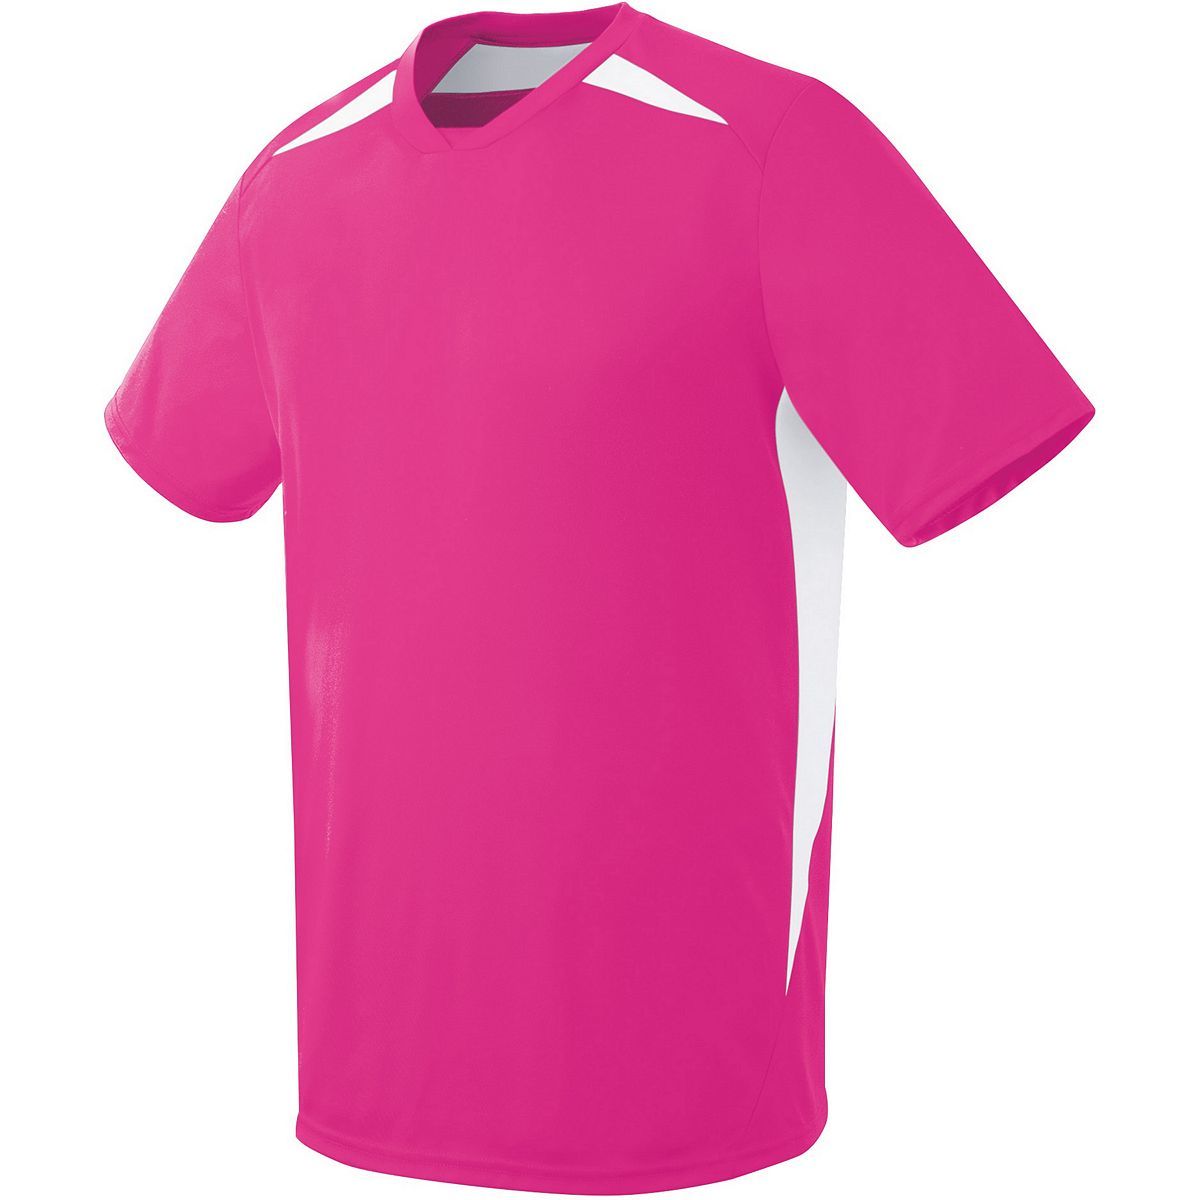 High 5 Youth Hawk Jersey in Raspberry/White  -Part of the Youth, Youth-Jersey, High5-Products, Soccer, Shirts, All-Sports-1 product lines at KanaleyCreations.com